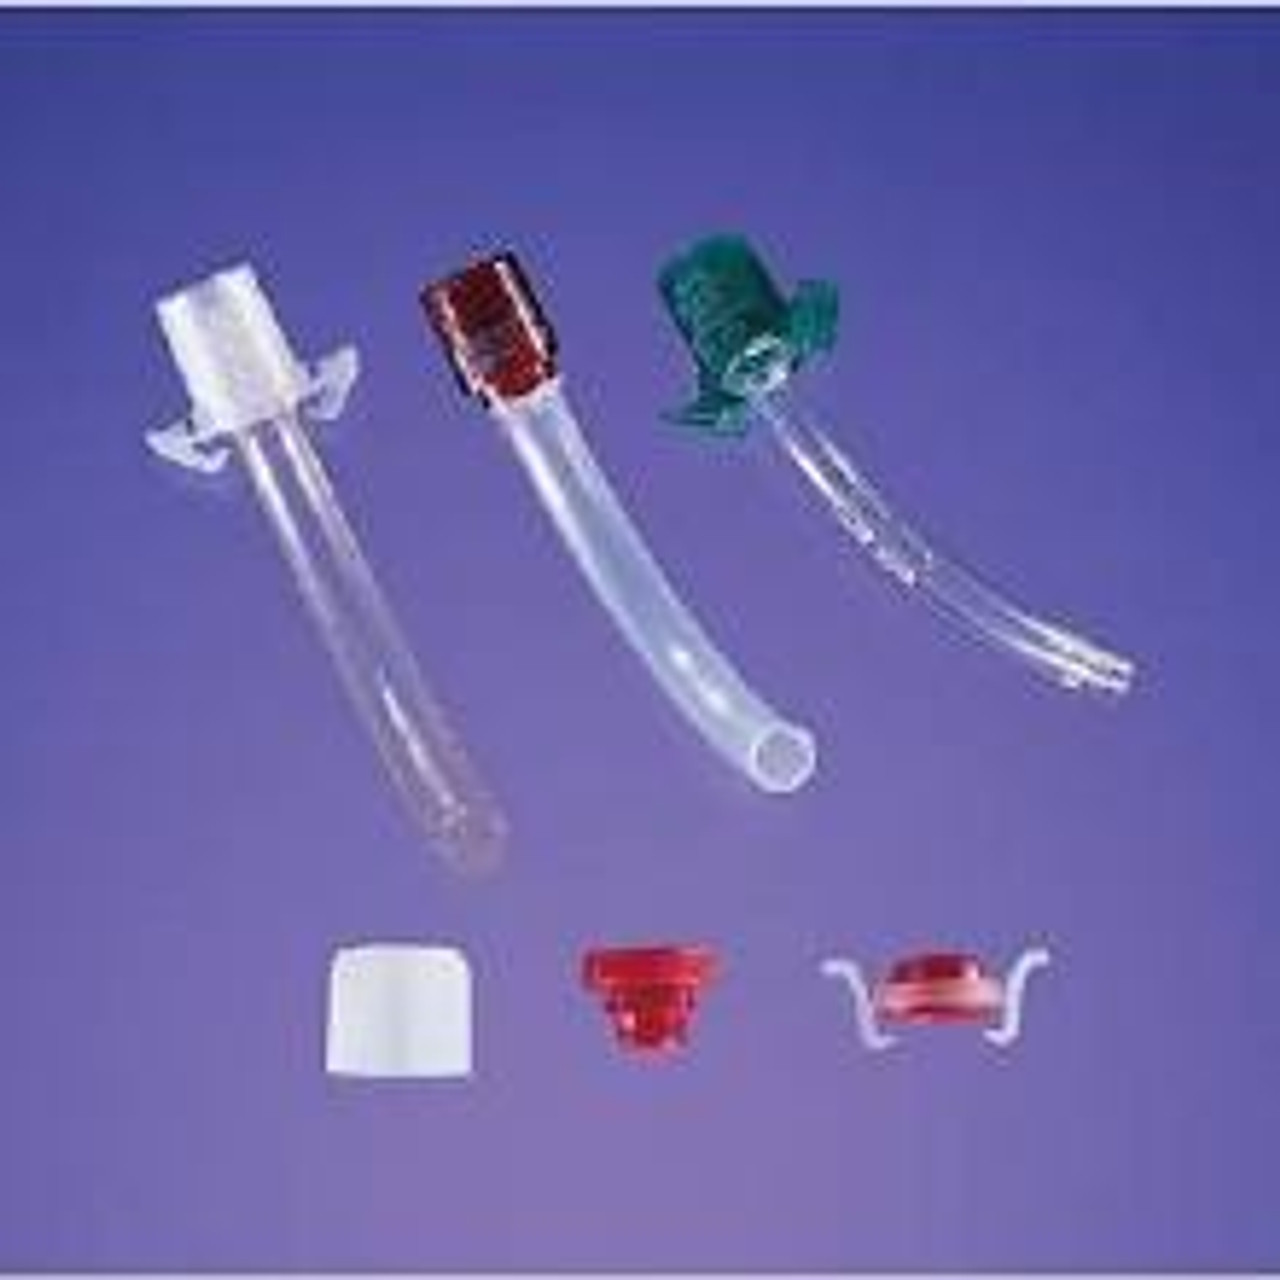 SHILEY FENSTRATED Disposable INNER CANNULA 4 BX/10 (MDT-4DICFEN)